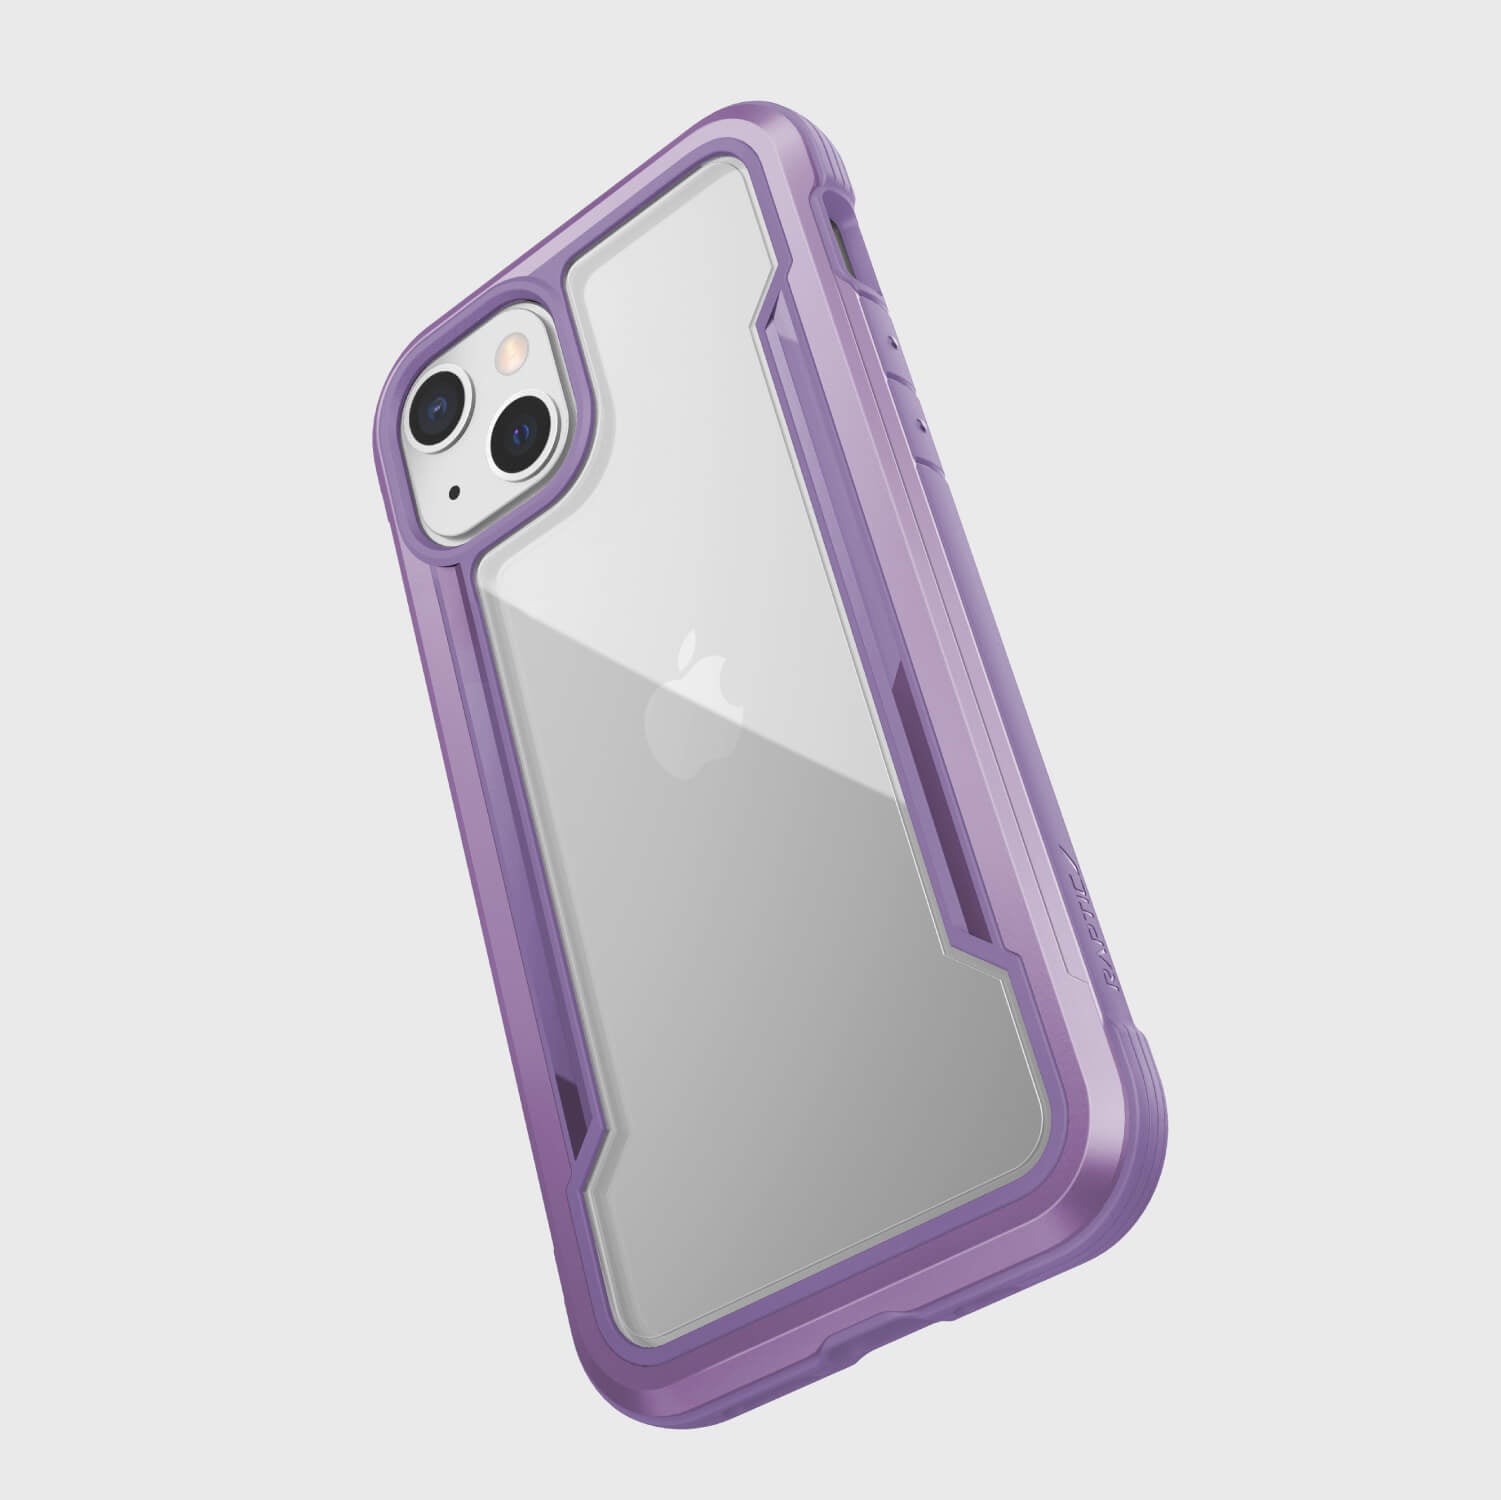 The back view of an iPhone 13 Mini Case - SHIELD PRO in purple.